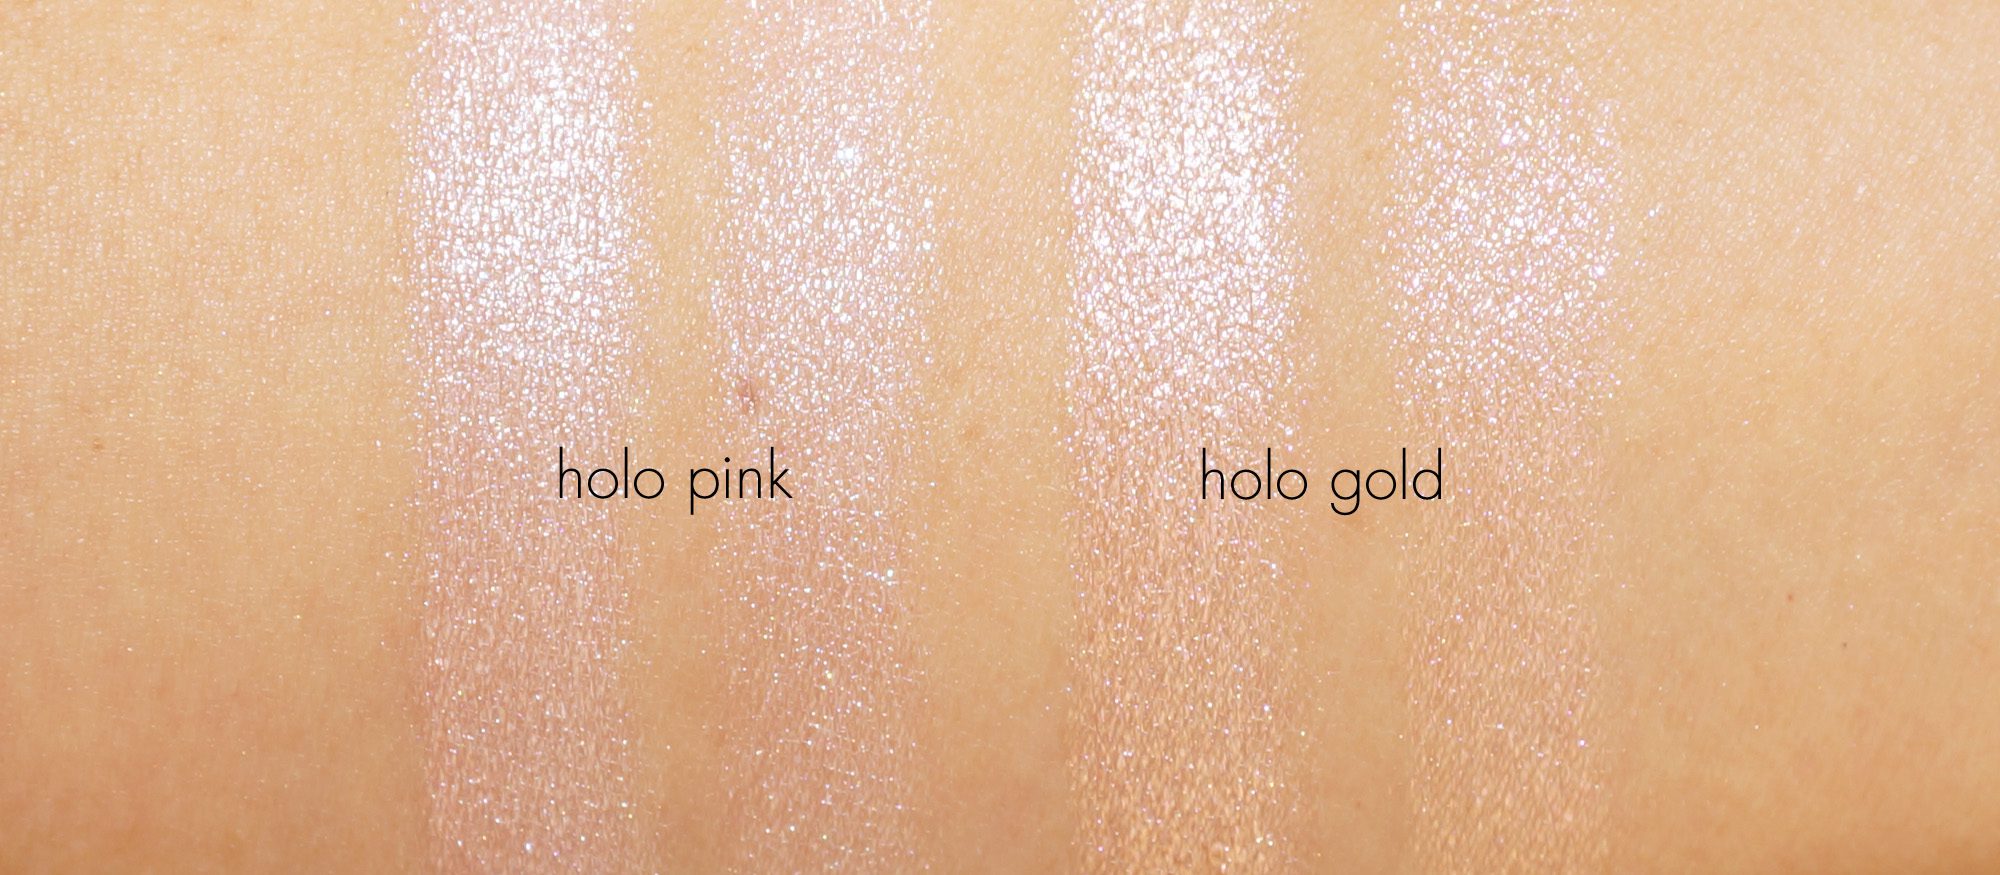 Dior Nude Air Luminizers Glow Addict Holo Pink and Holo Gold swatches | The Beauty Look Book